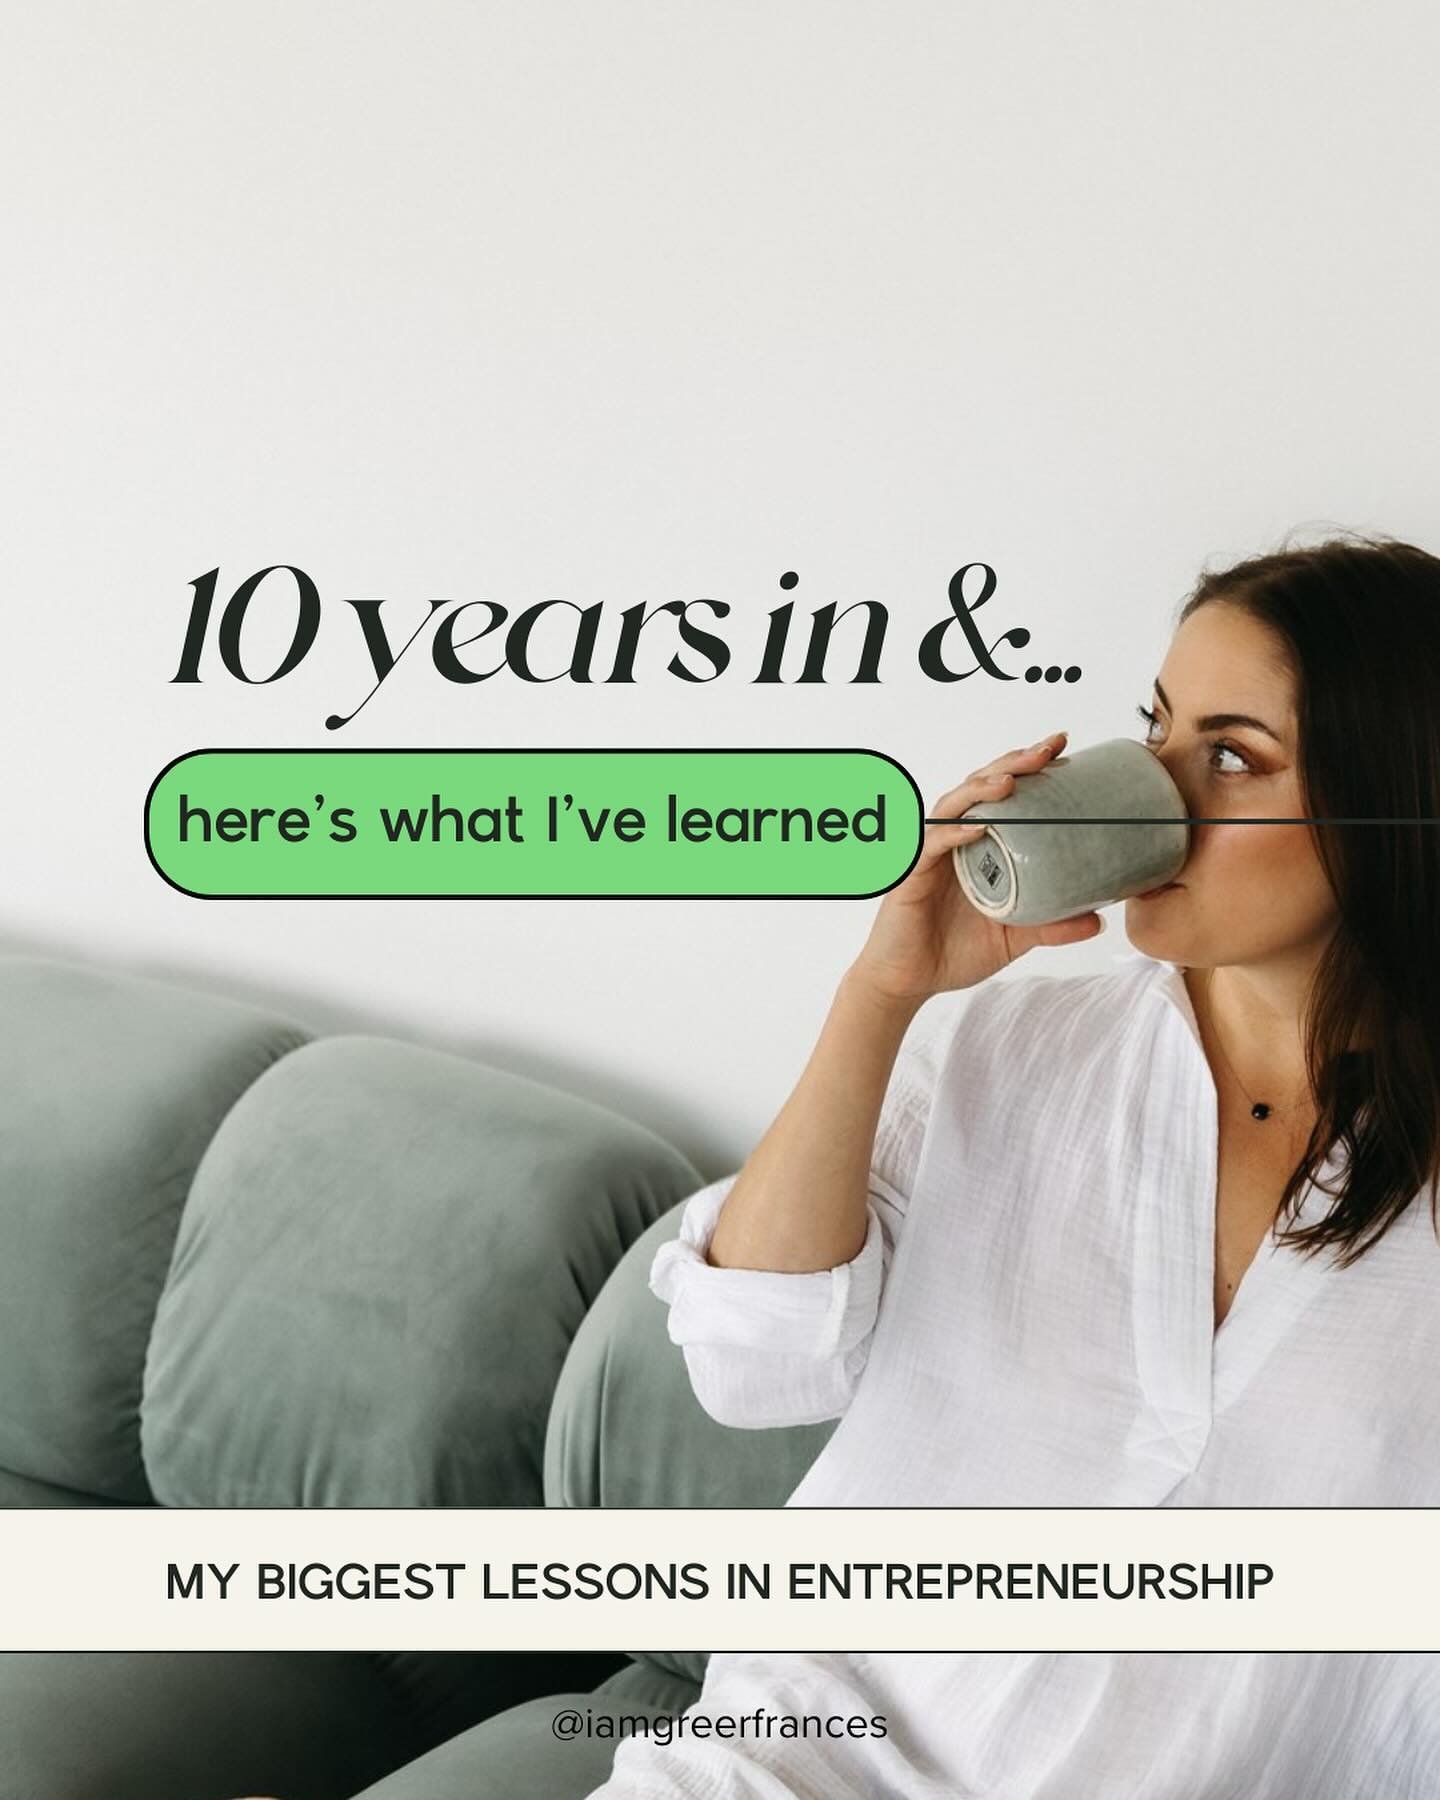 10 years into entrepreneurship and here are the biggest lessons I&rsquo;ve learned! 

What are your biggest lessons and takeaways from entrepreneurship? I&rsquo;d love to hear it👇🏼

#entrepreneurship #entrepreneurlife #businessowner #buildyourbusin